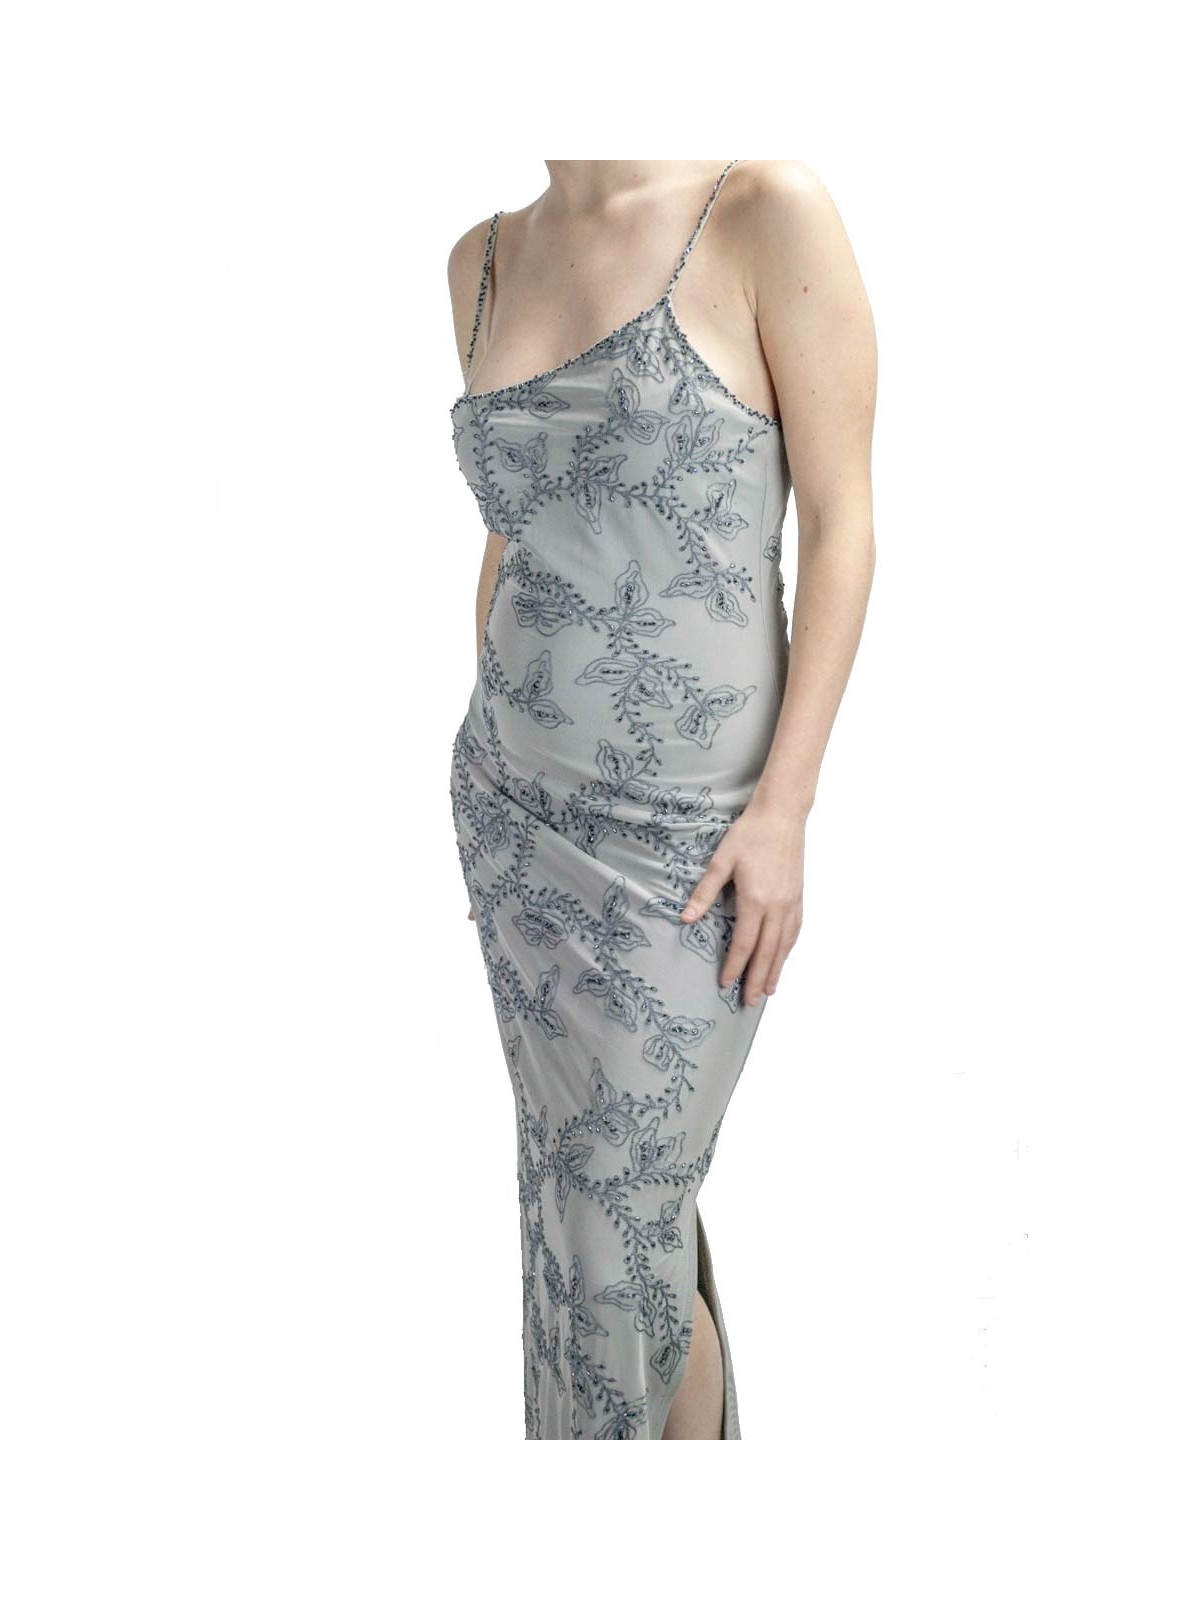 Dress Woman Dress Long to the feet the Stylish M-Light Grey - Floral Embroidery and Black beads